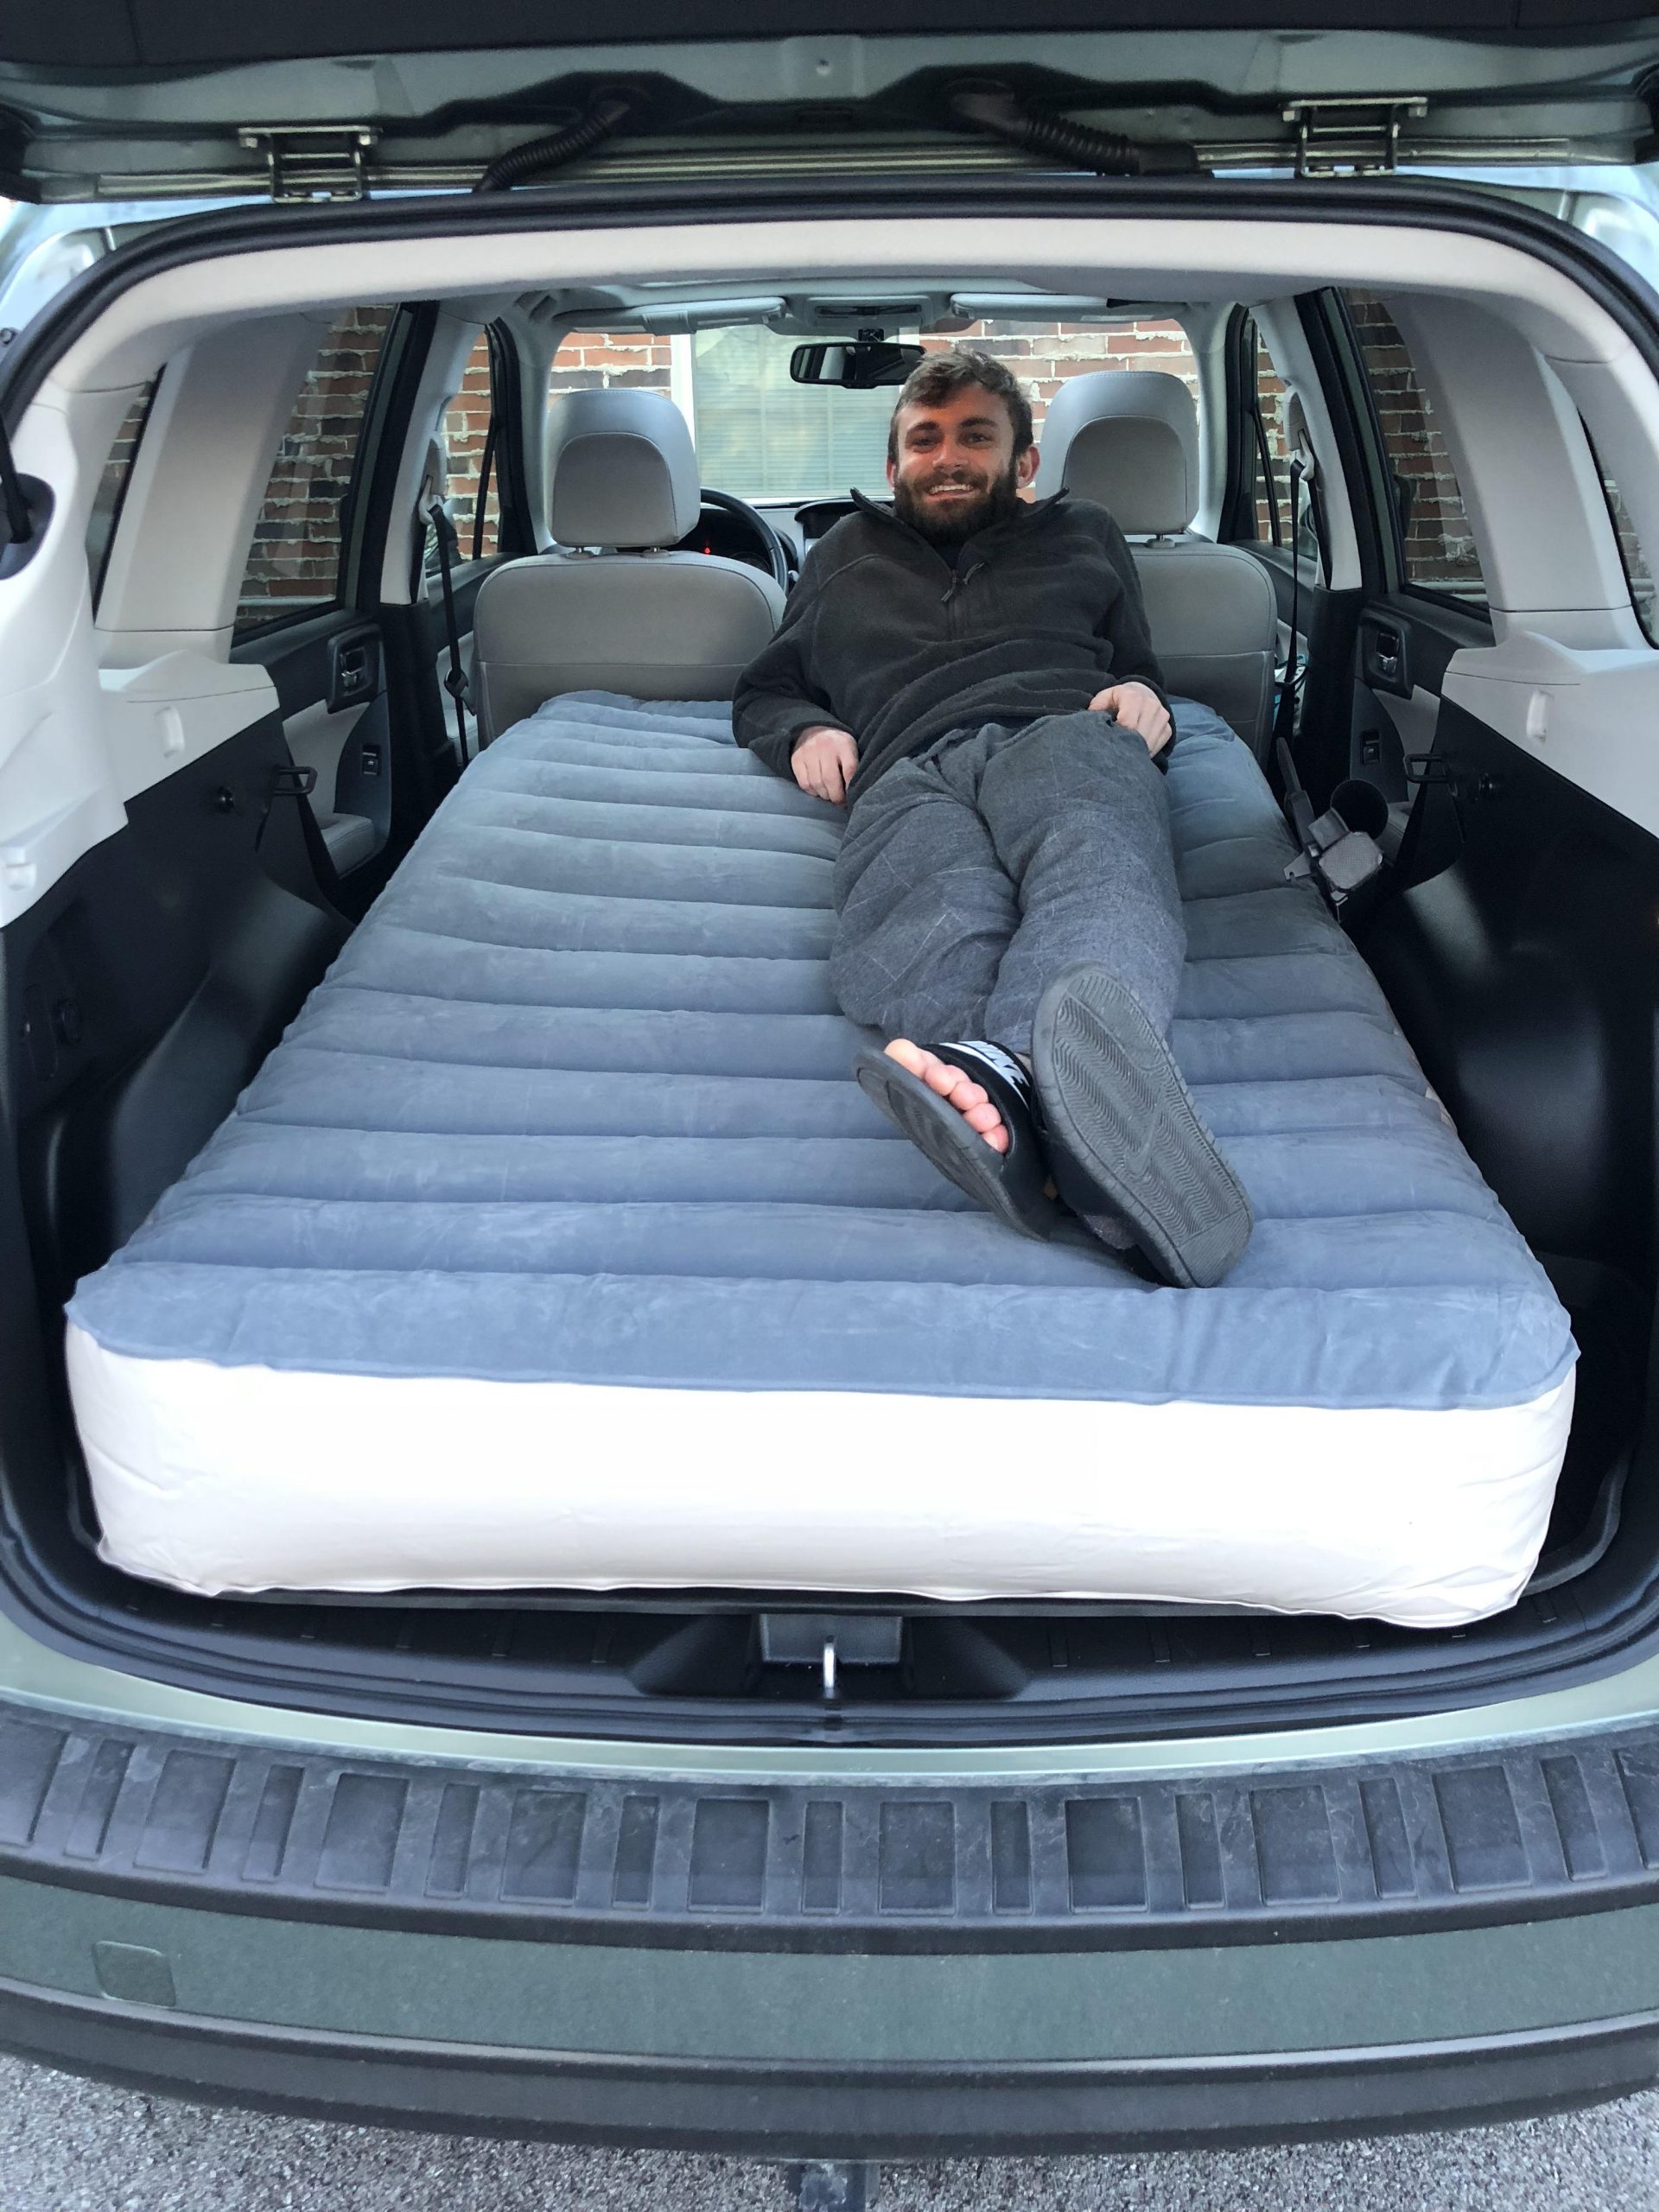 8 Images Subaru Outback Air Mattress And View